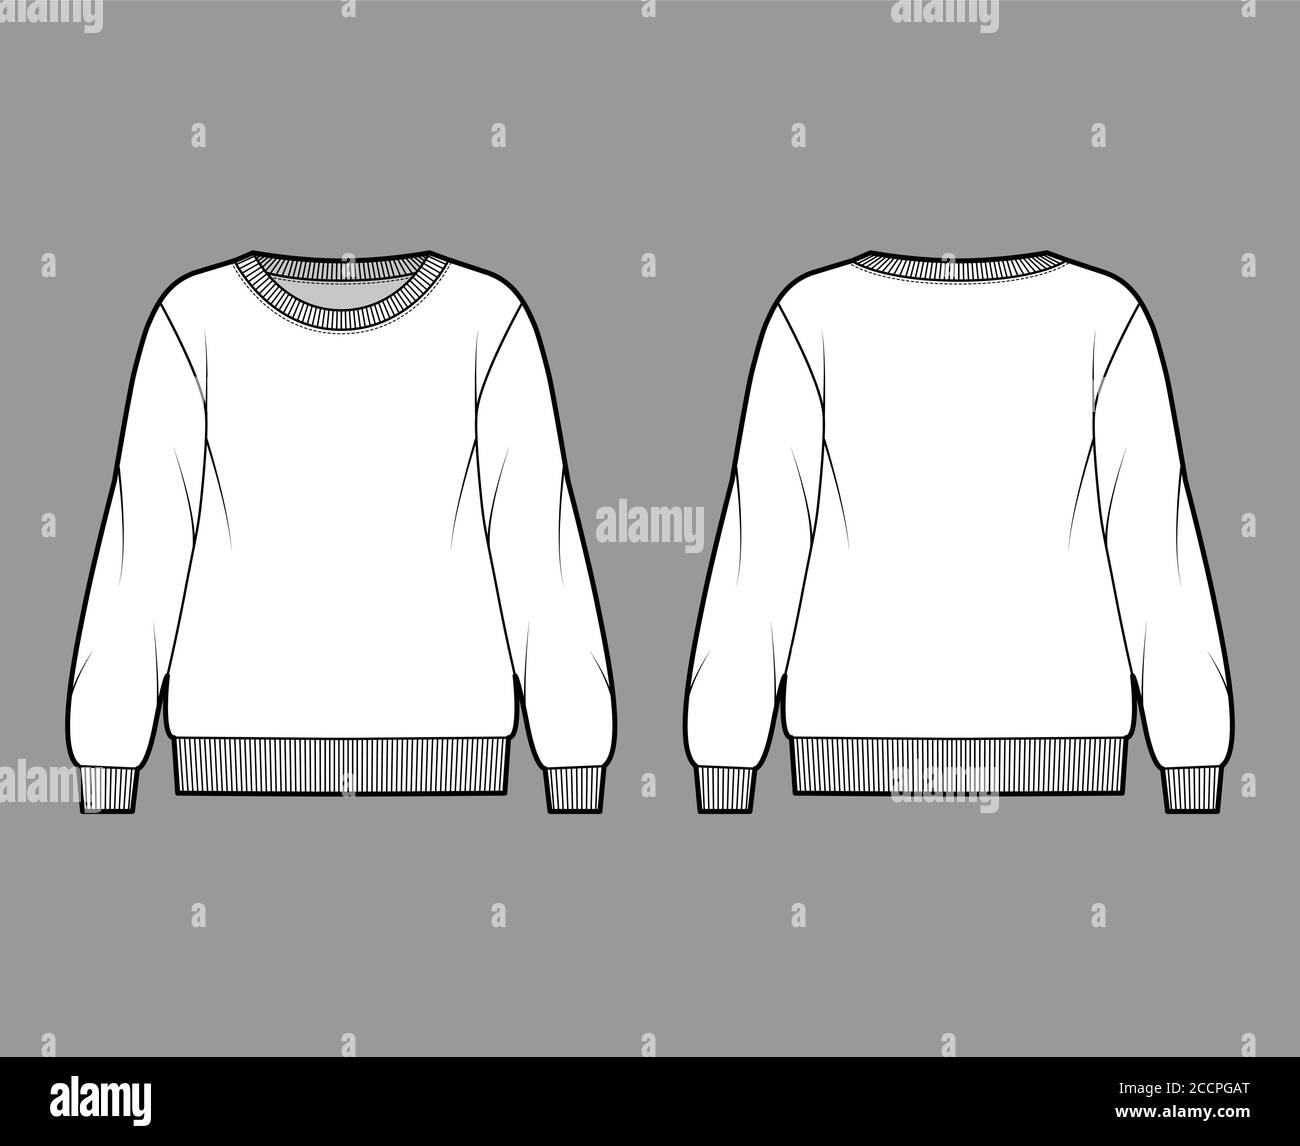 Oversized cotton-terry sweatshirt technical fashion illustration with crew neckline, long sleeves, ribbed trims. Flat outwear jumper apparel template front back white color. Women, men unisex top CAD Stock Vector